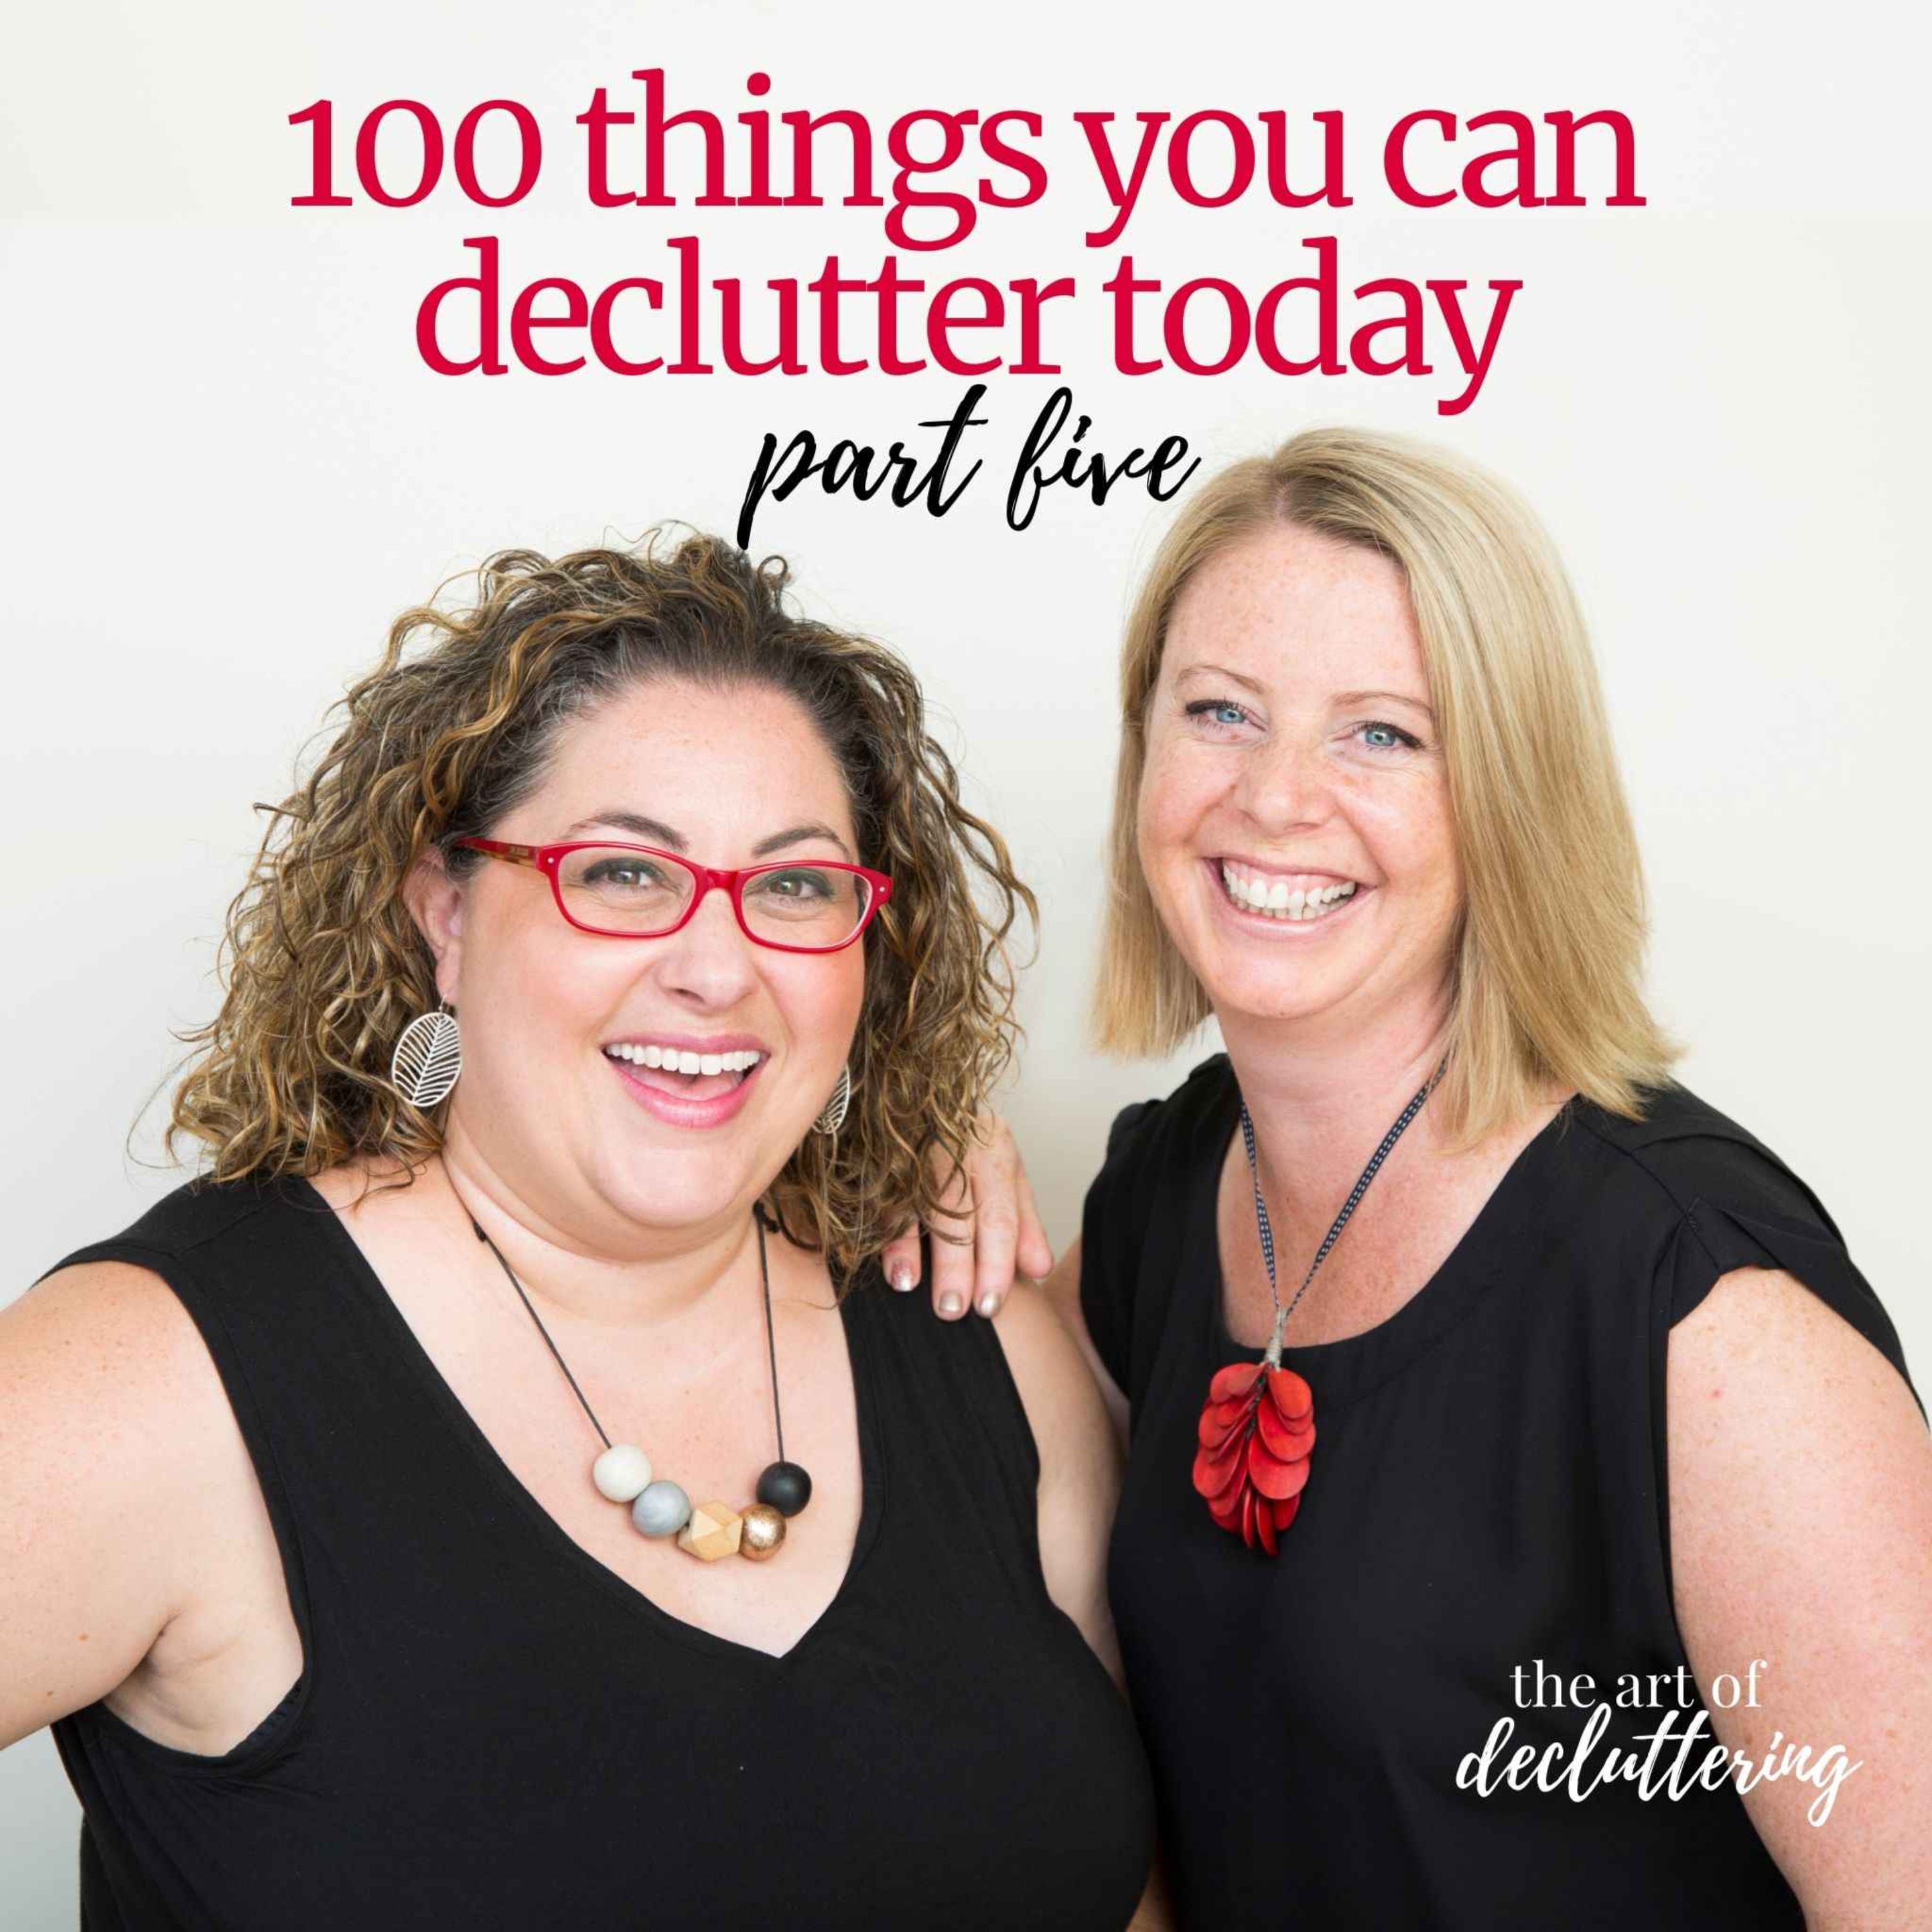 100 things you can declutter today - Part 5